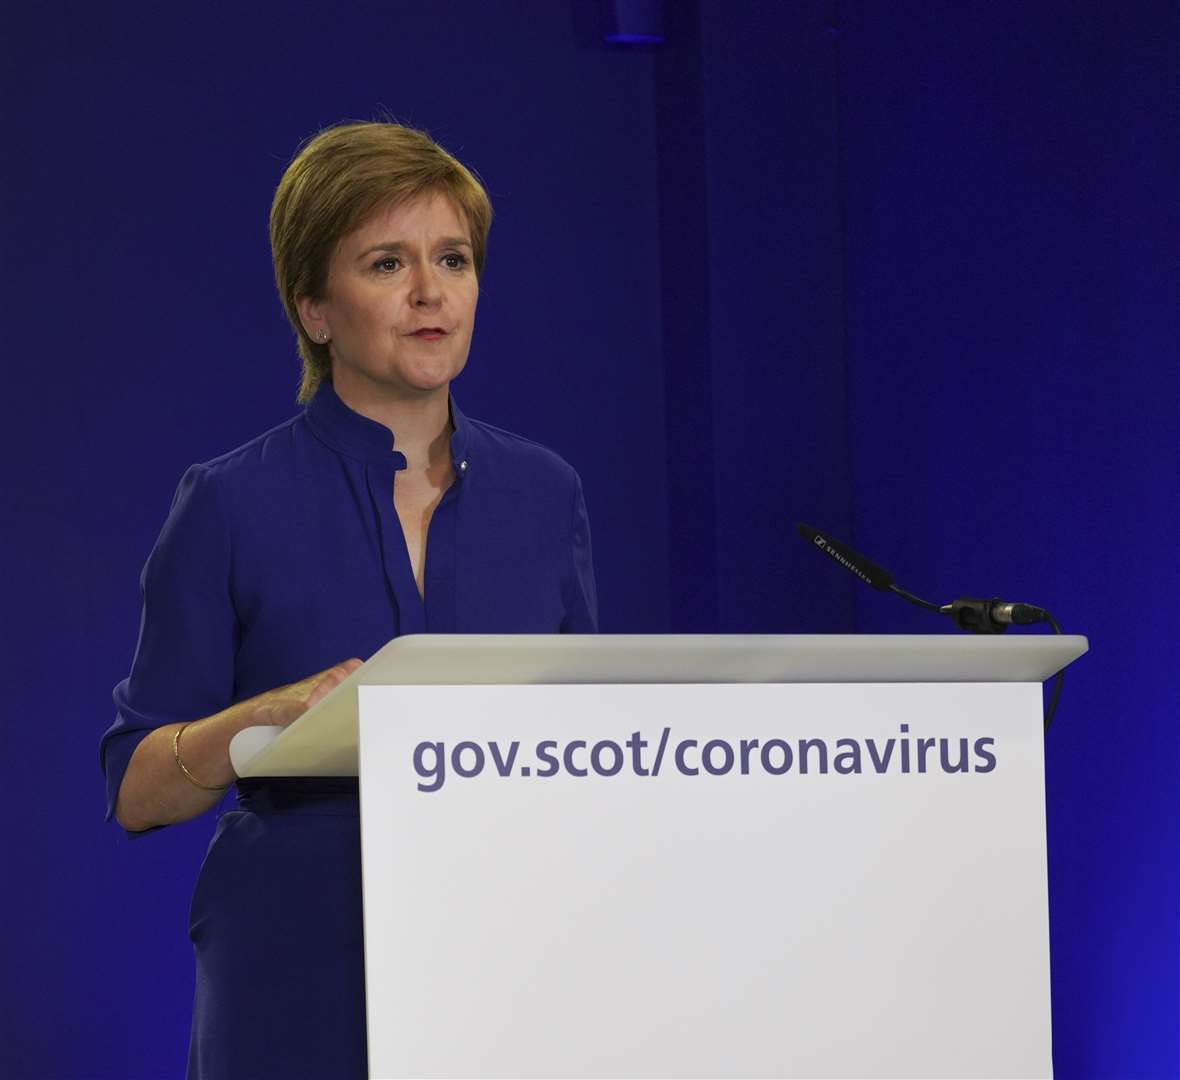 Nicola Sturgeon during her Covid-19 press conference on Tuesday.